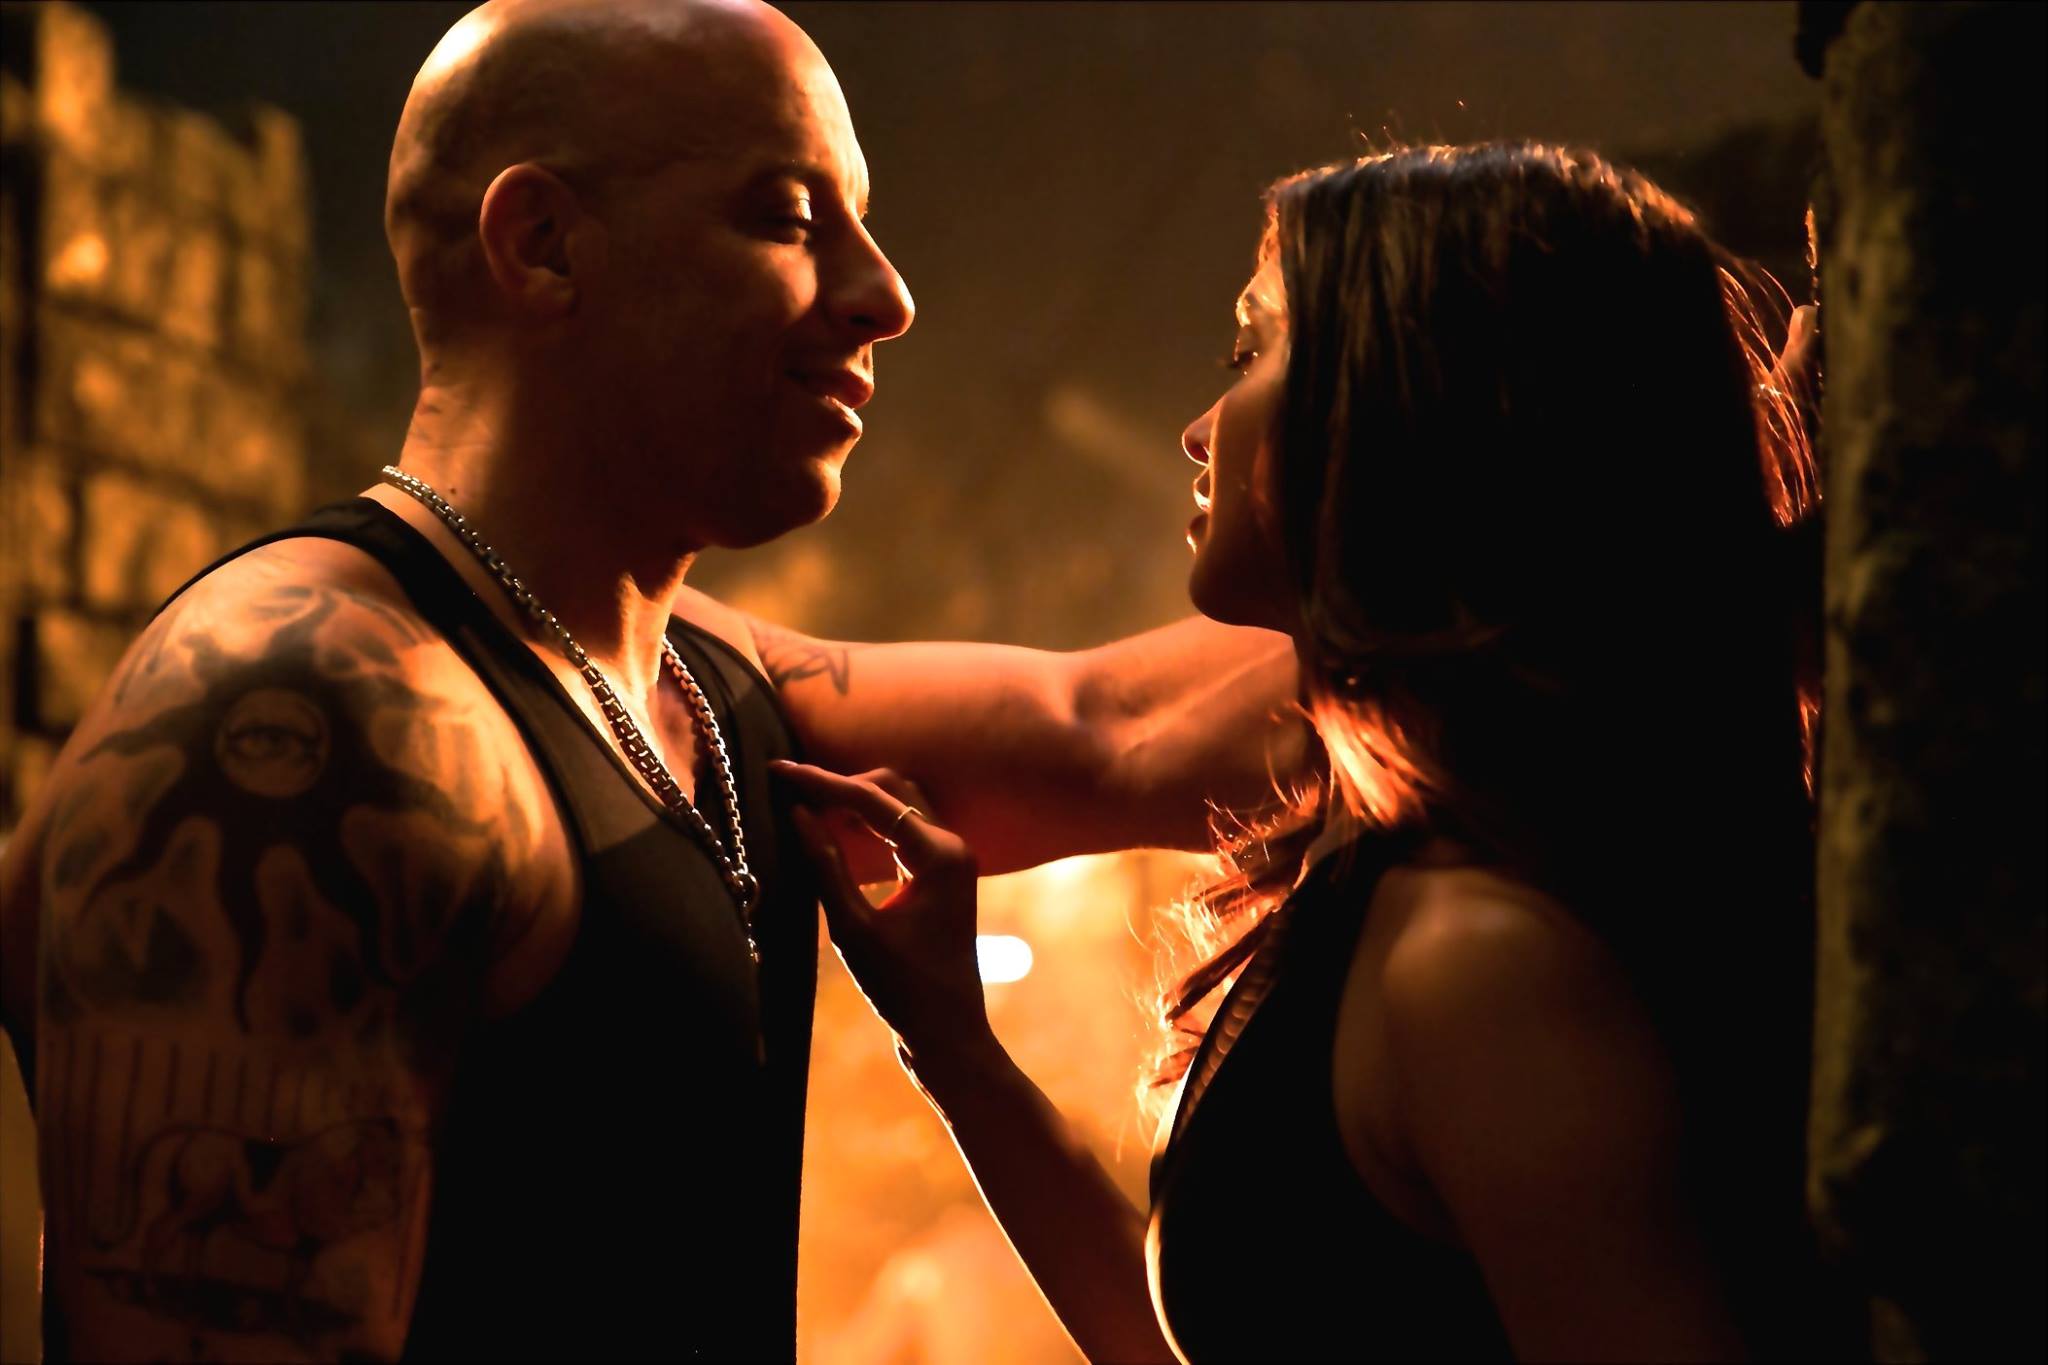 XXx: Return Of Xander Cage Backgrounds, Compatible - PC, Mobile, Gadgets| 2048x1365 px